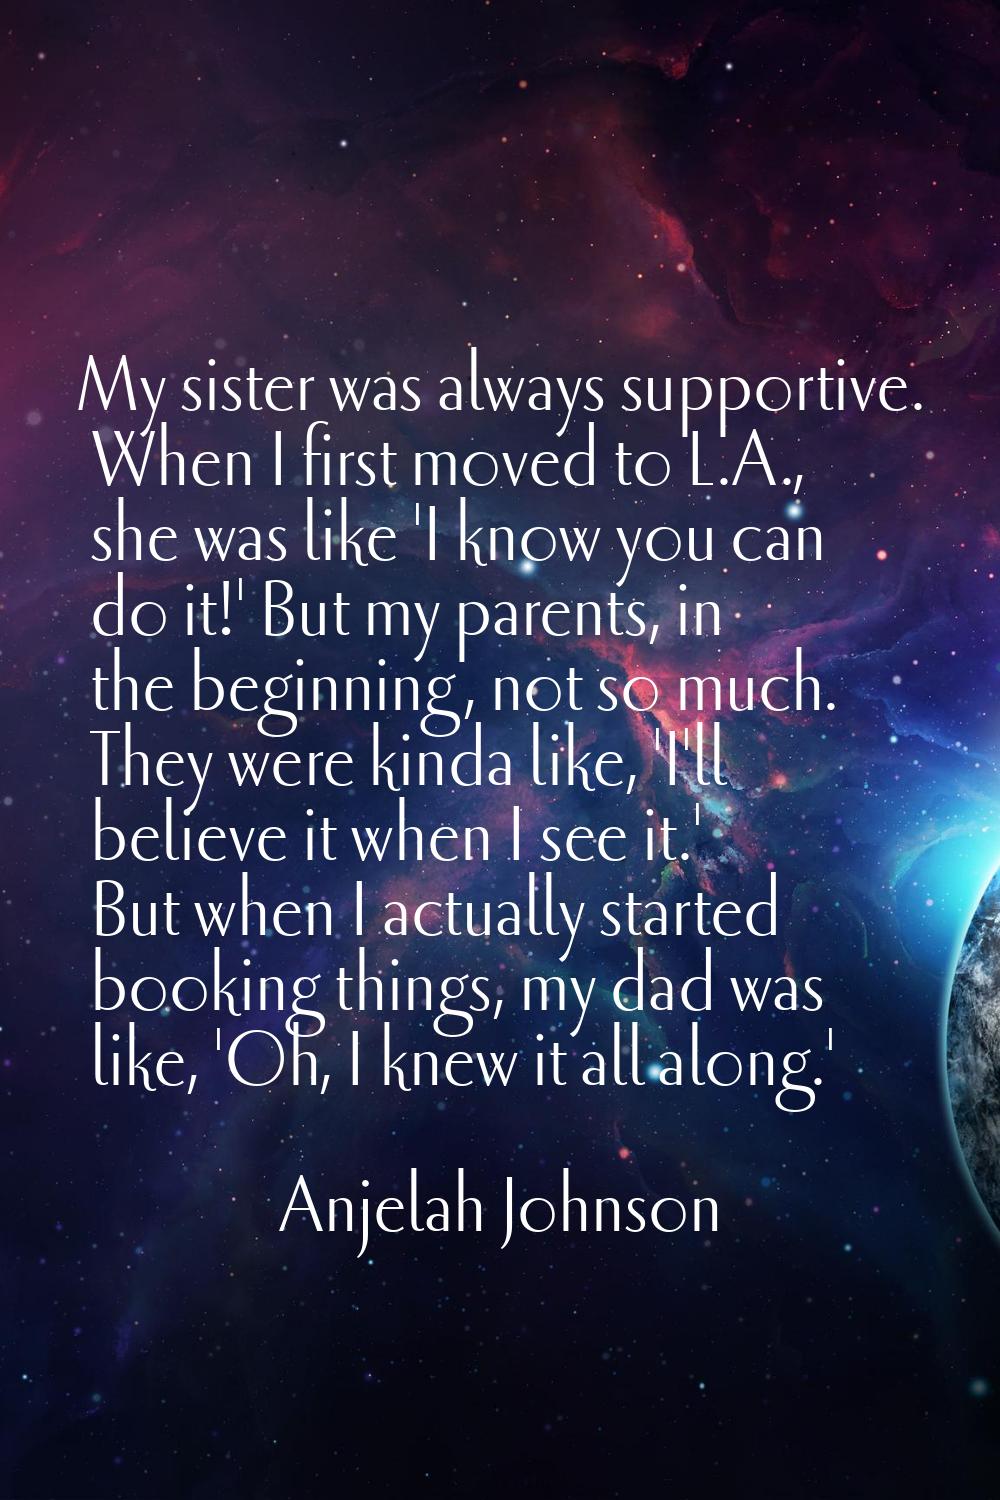 My sister was always supportive. When I first moved to L.A., she was like 'I know you can do it!' B